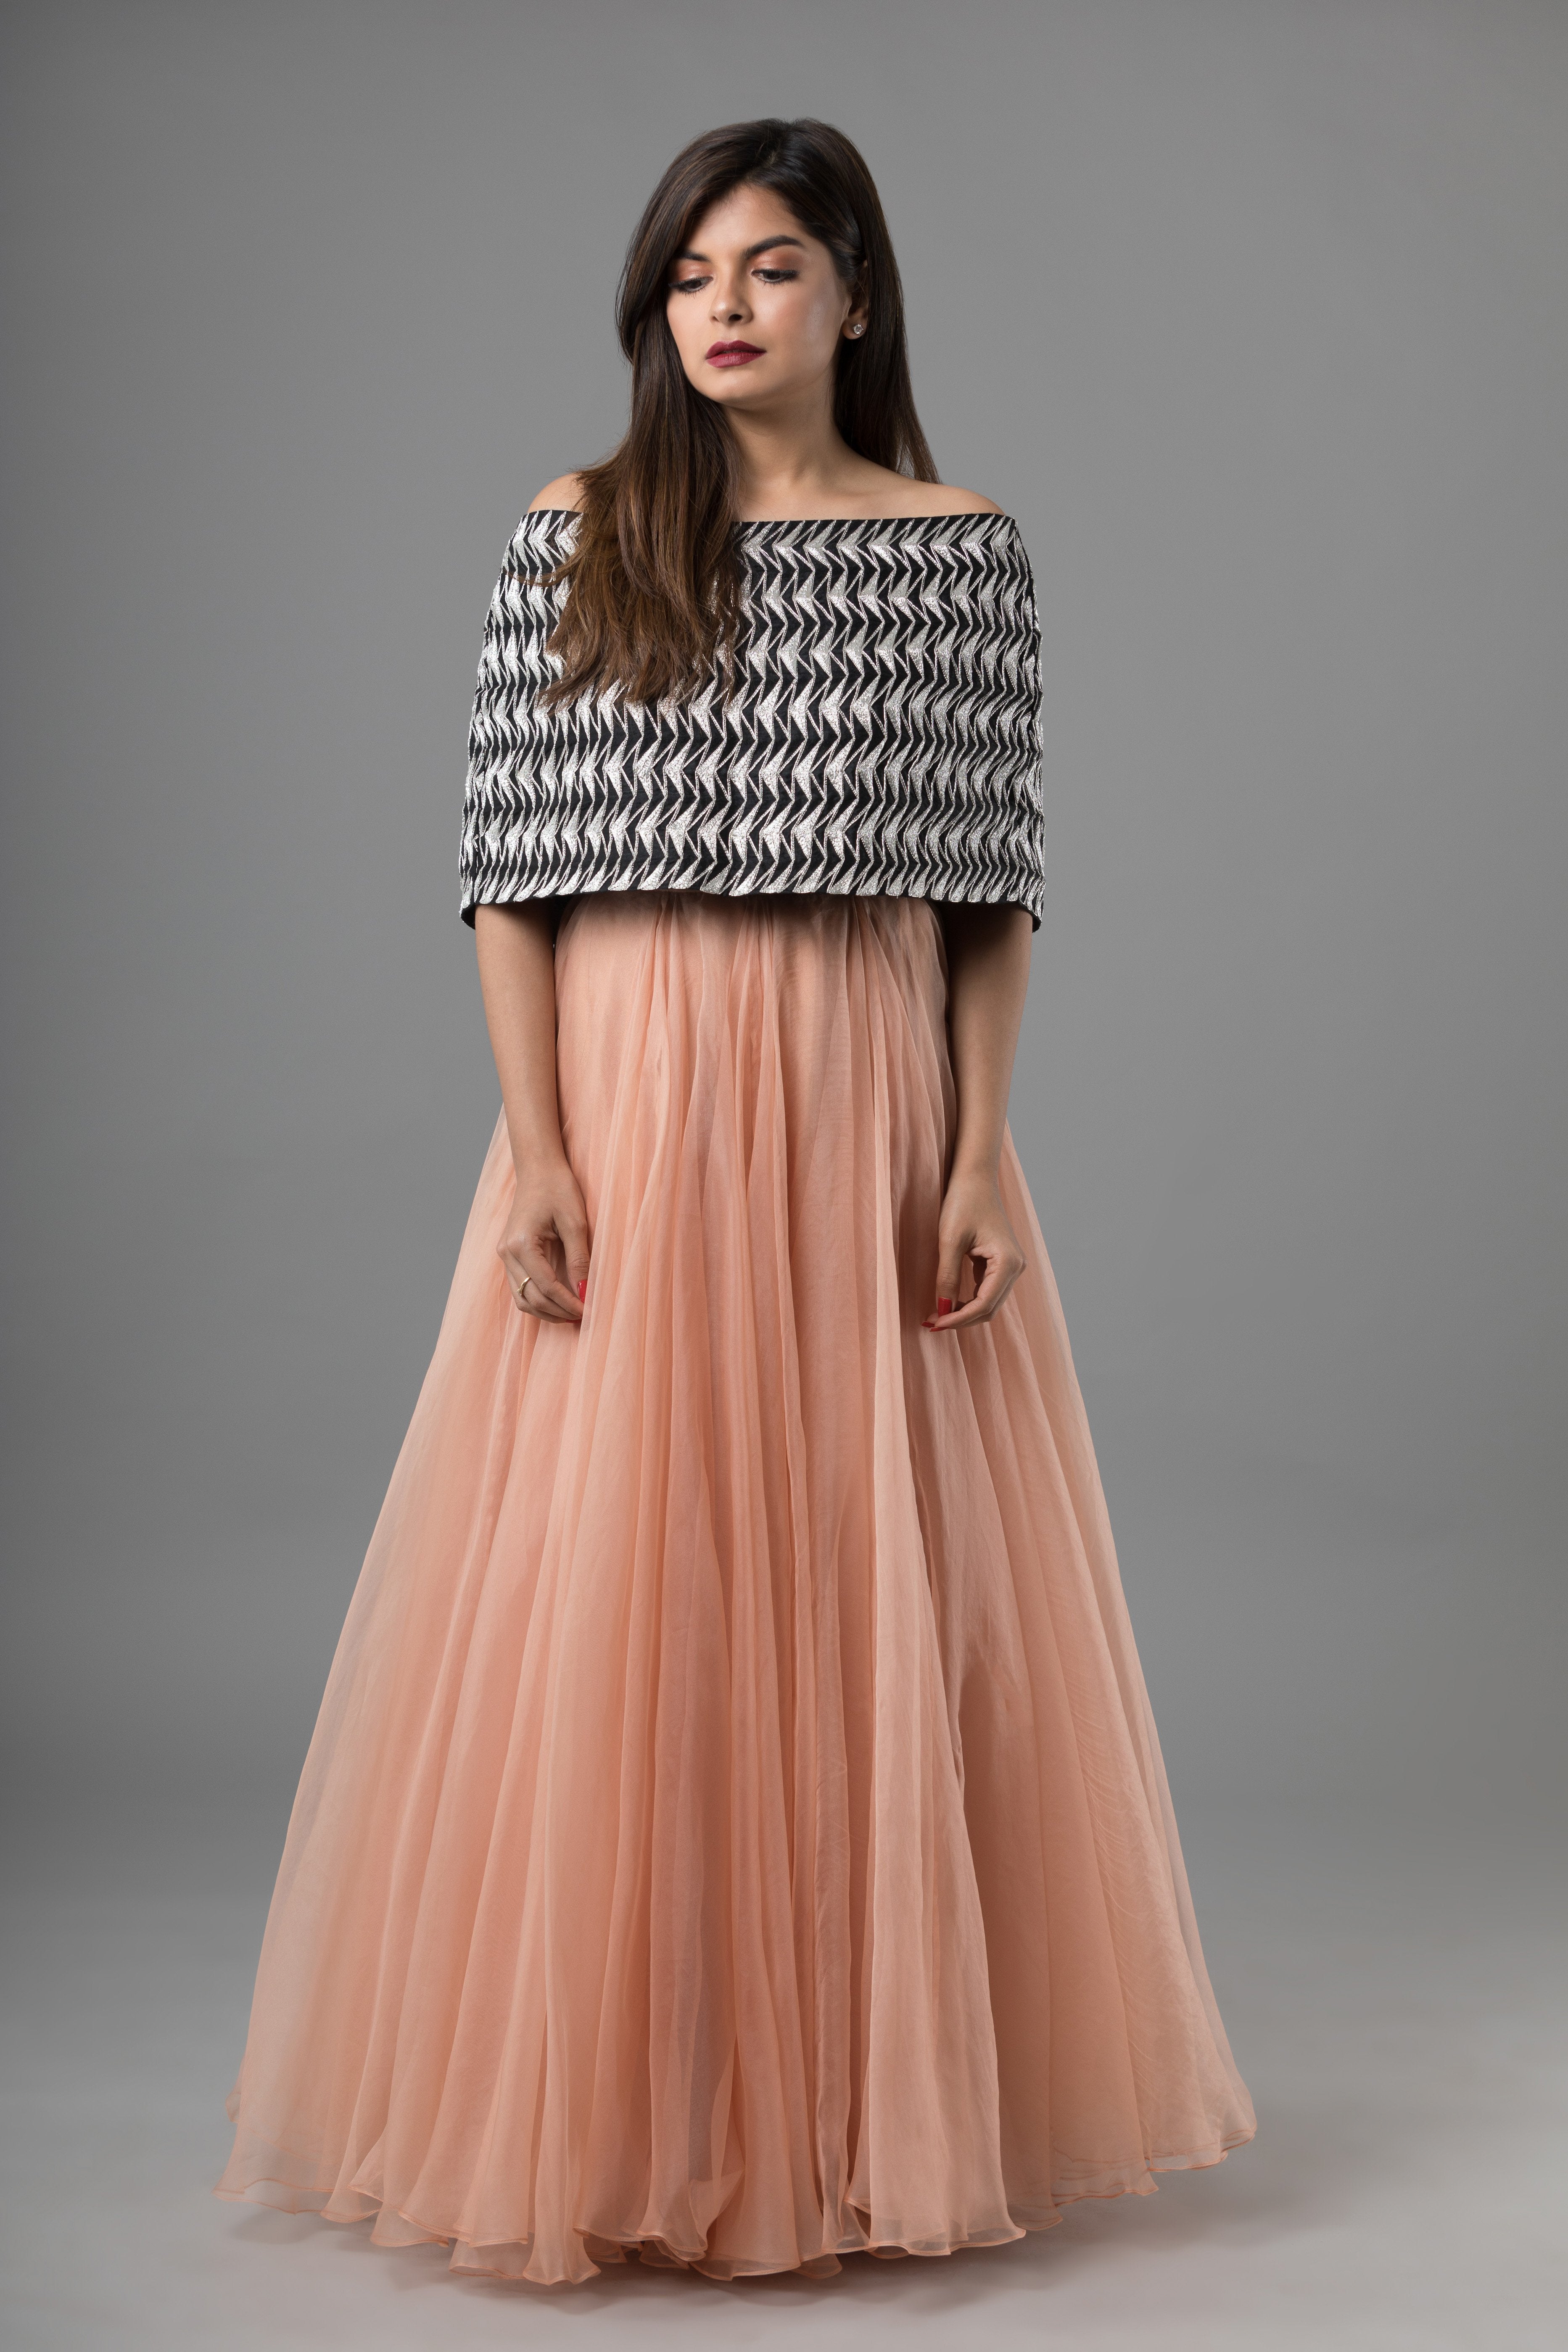 Sanjhana Reddy - Geometric Embroidered Cape Paired With An Organza Skirt